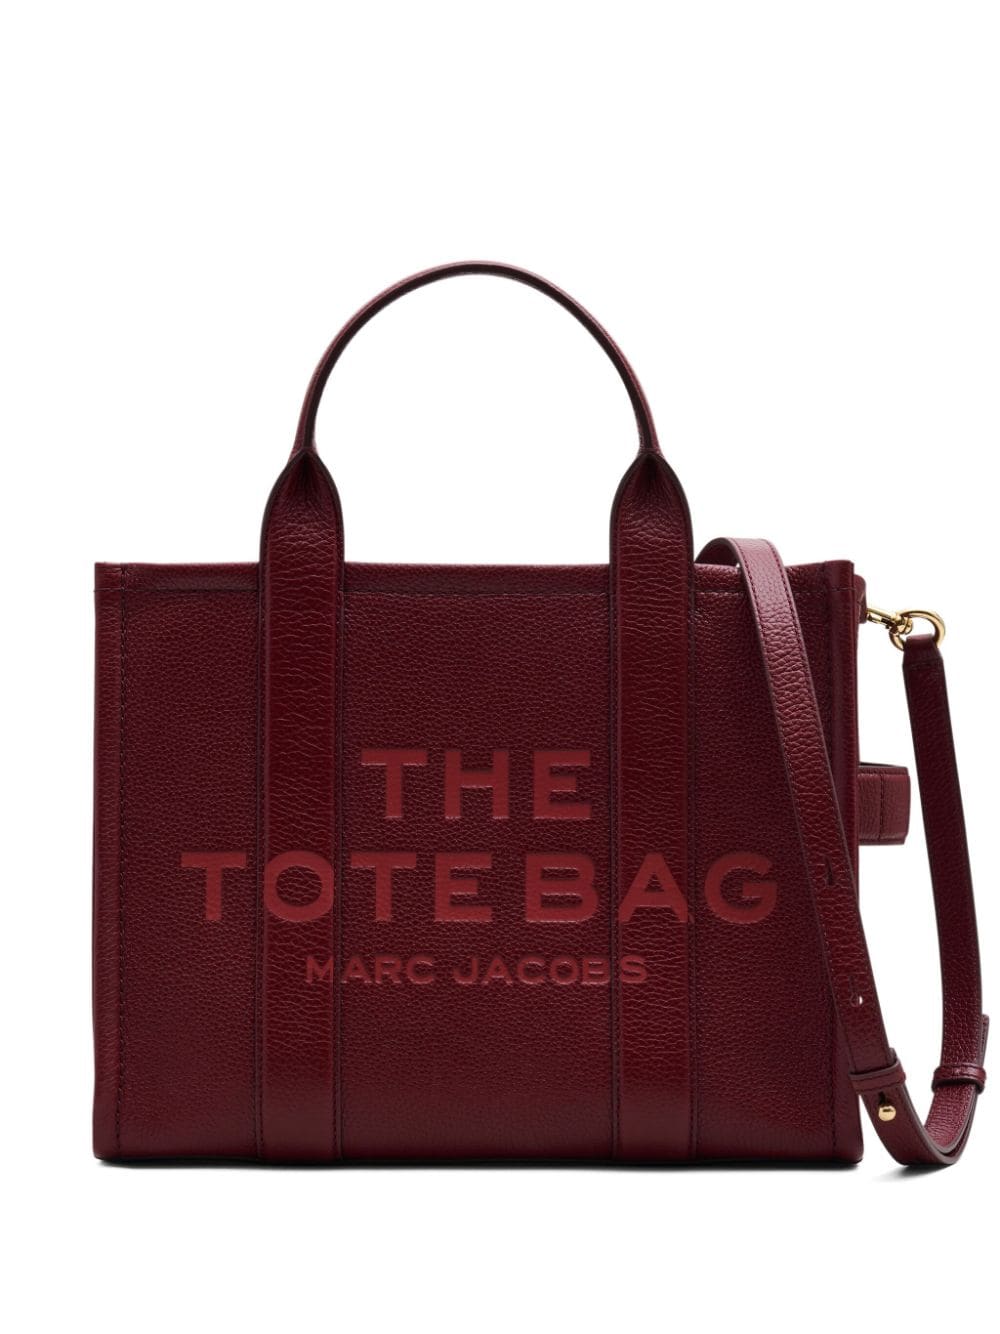 Marc Jacobs Mittelgroßer The Leather Shopper - Rot von Marc Jacobs